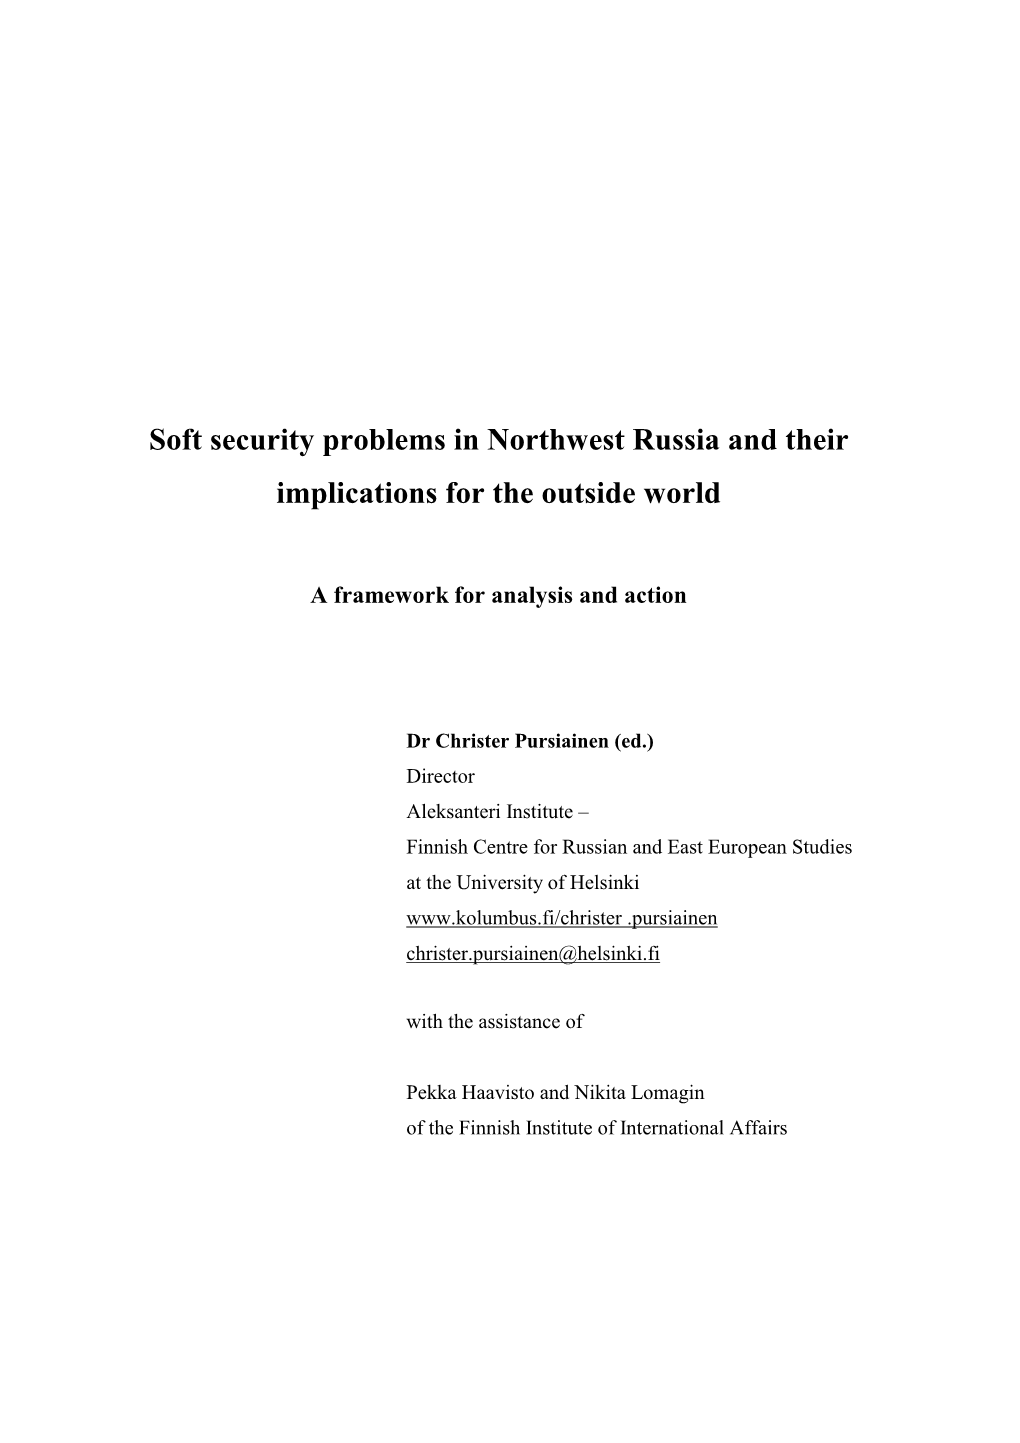 Soft Security Problems in Northwest Russia and Their Implications for the Outside World